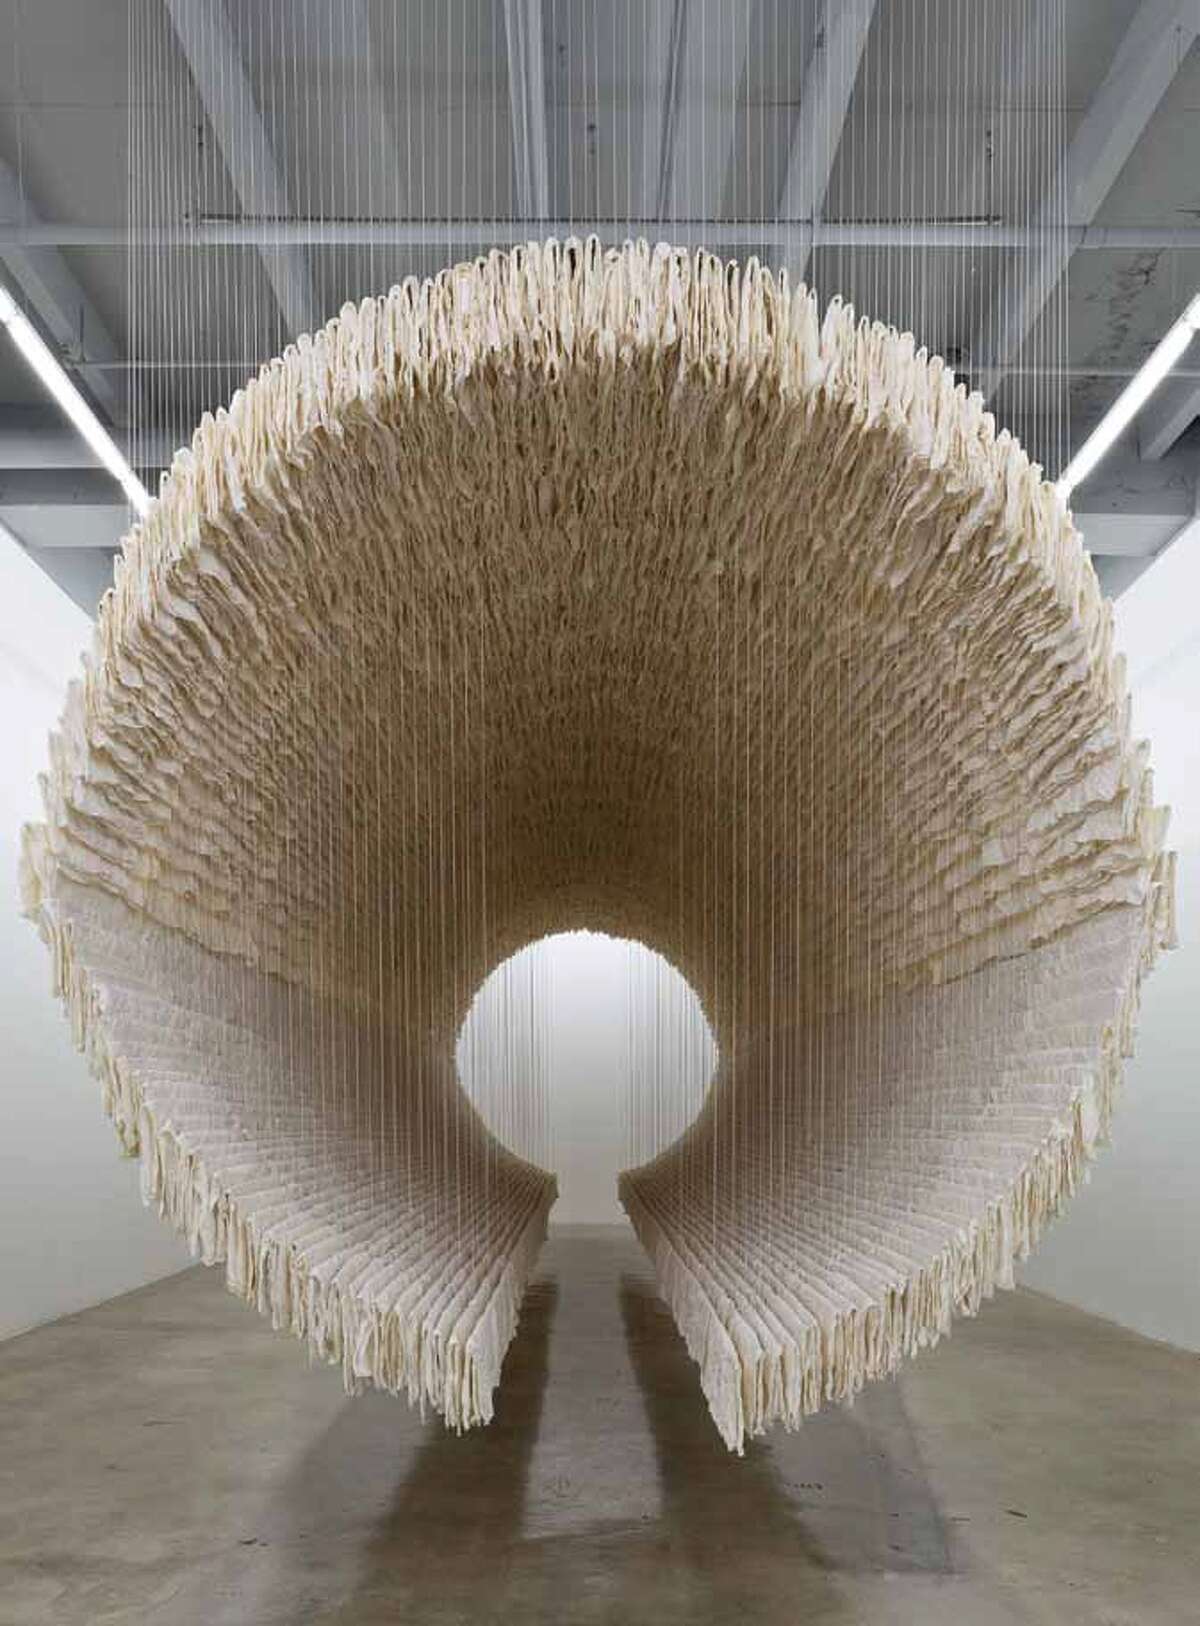 Zhu Jinshi’s 49-foot “Boat” comprises more than 8,500 sheets of calligraphy paper strung on bamboo rods and suspended from the ceiling with thread. It is part of the “28 Chinese” exhibit at San Antonio Museum of Art.